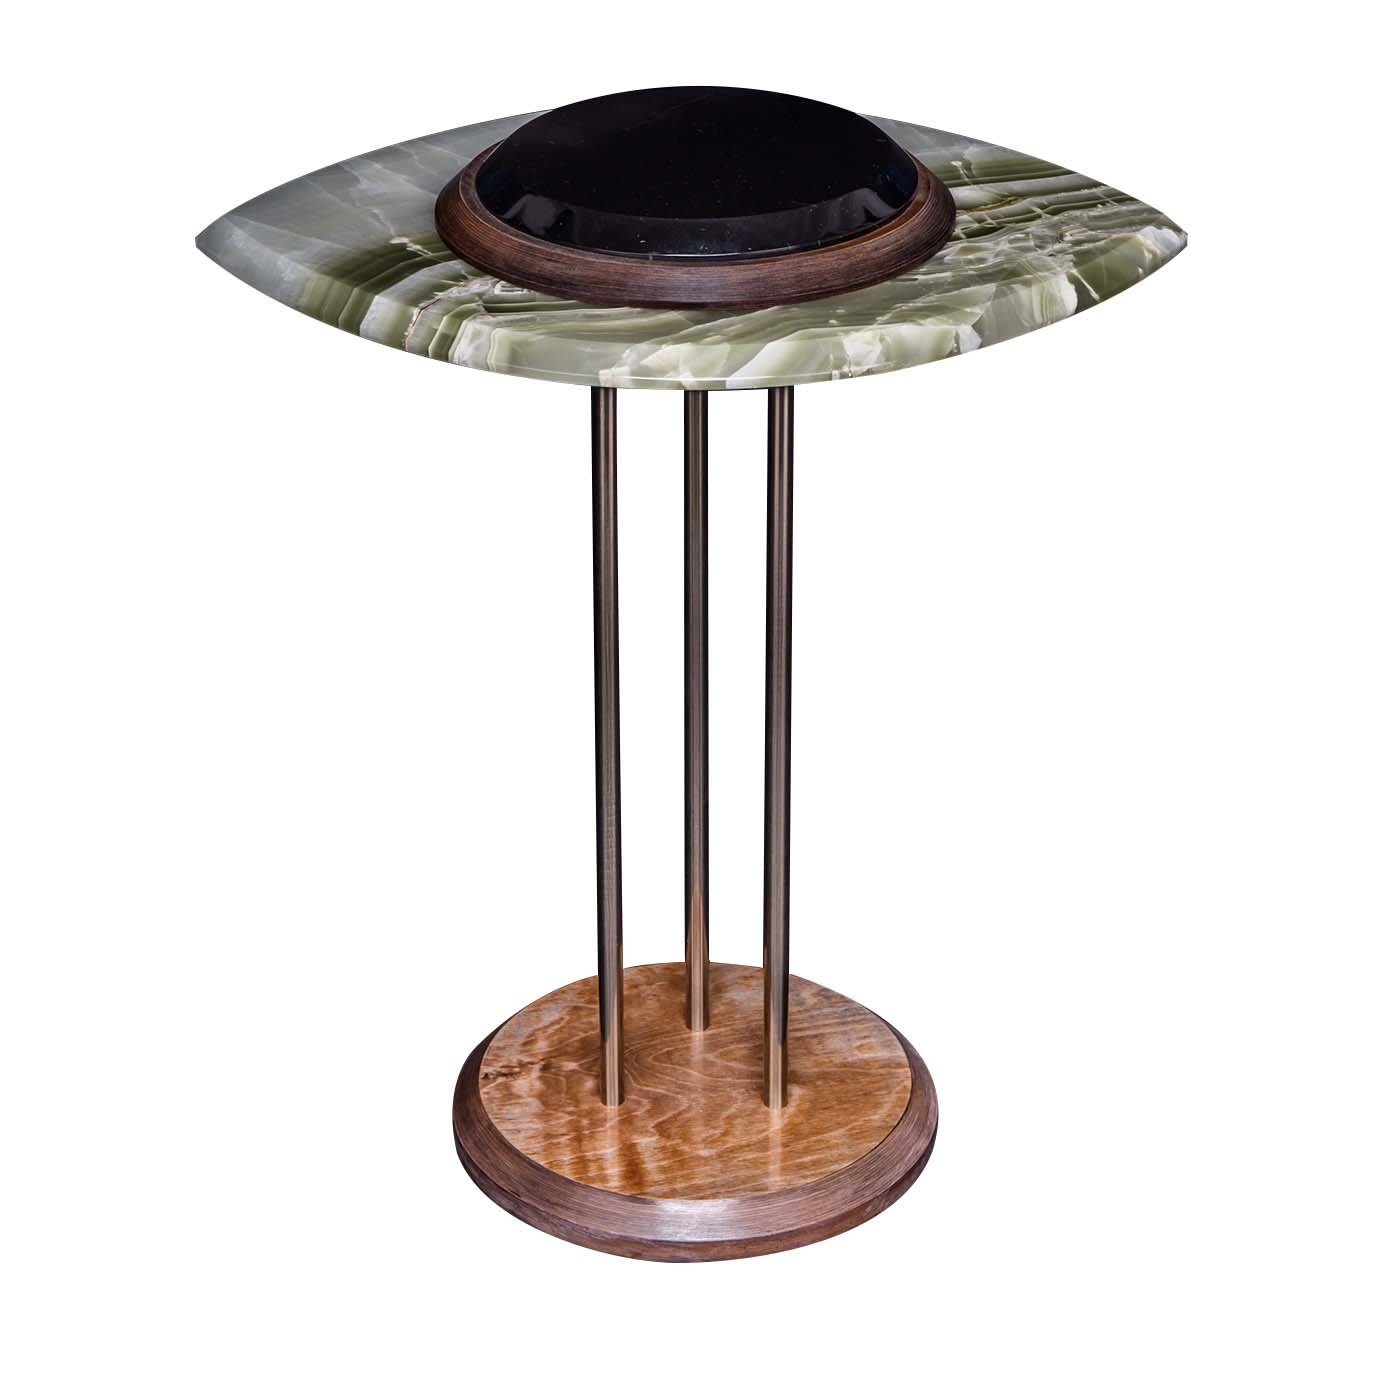 The Eye Side Table in Green and Black - Ateena